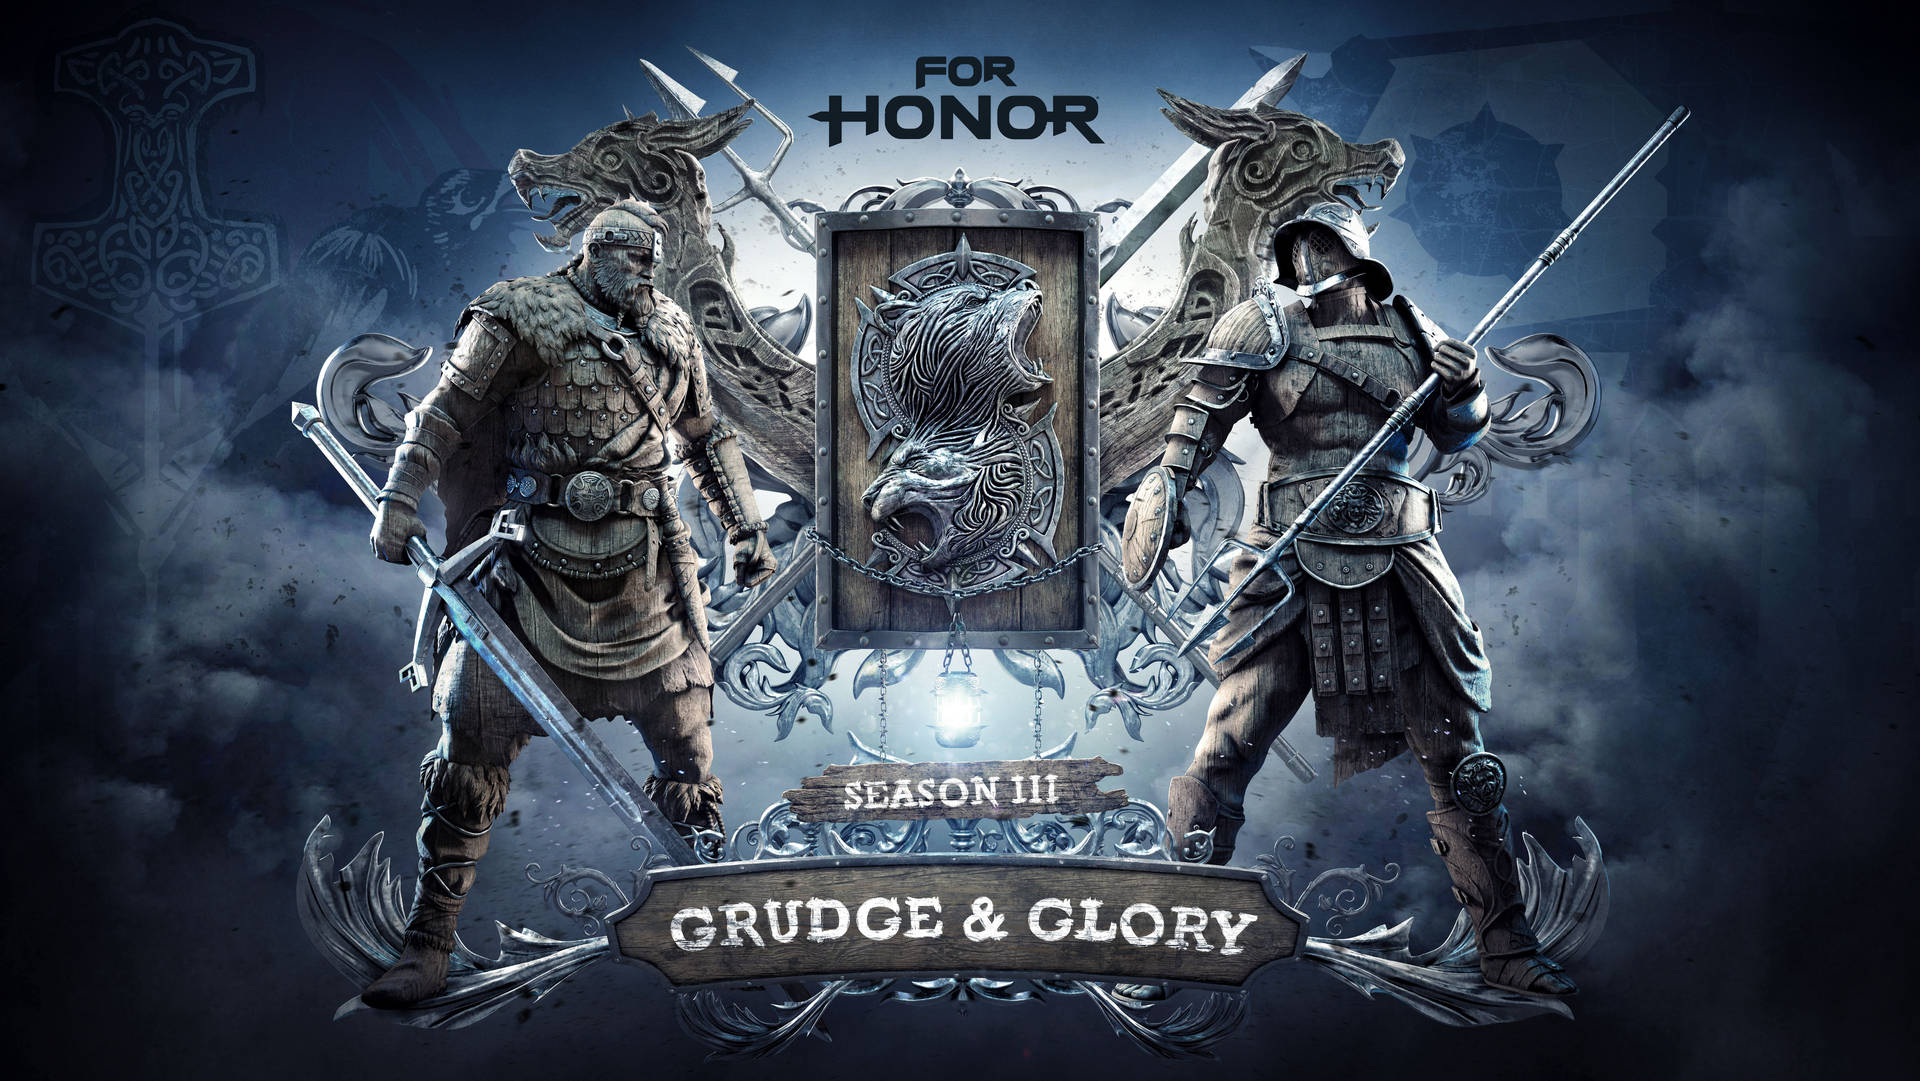 Join the Battle of Grudge and Glory in For Honor Wallpaper